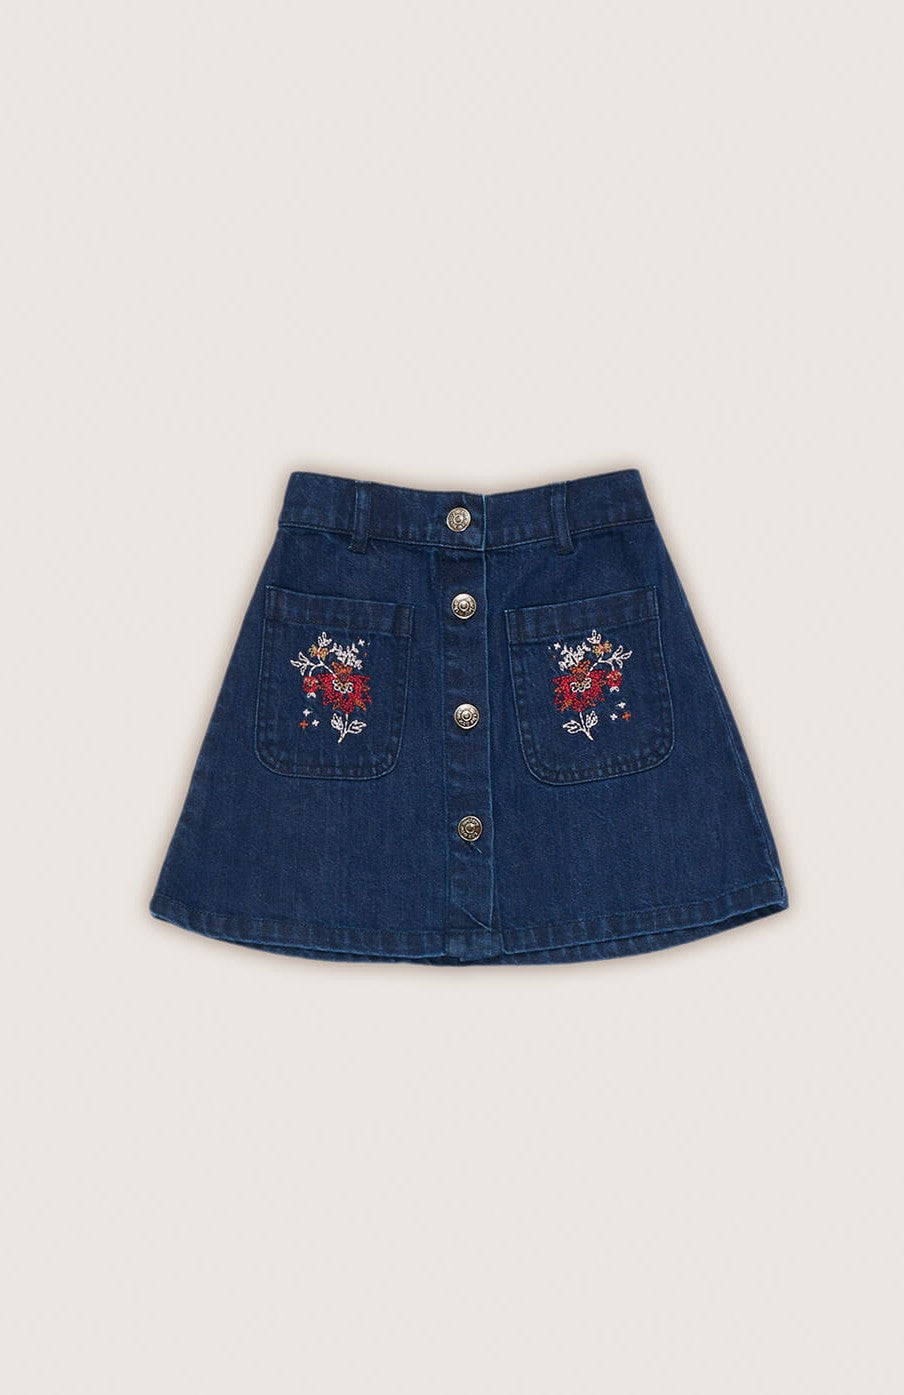 Shop Girl's denim skirts online in Hong Kong and Singapore. These girl's denim skirts in space blue are lightweight and perfect for hotter climates- made with 100% BCI cotton. Girl's denim skirts have elastic waists with the most stunning embroidery. Mini Me denim skirts are available for Mommy and daughter matching.